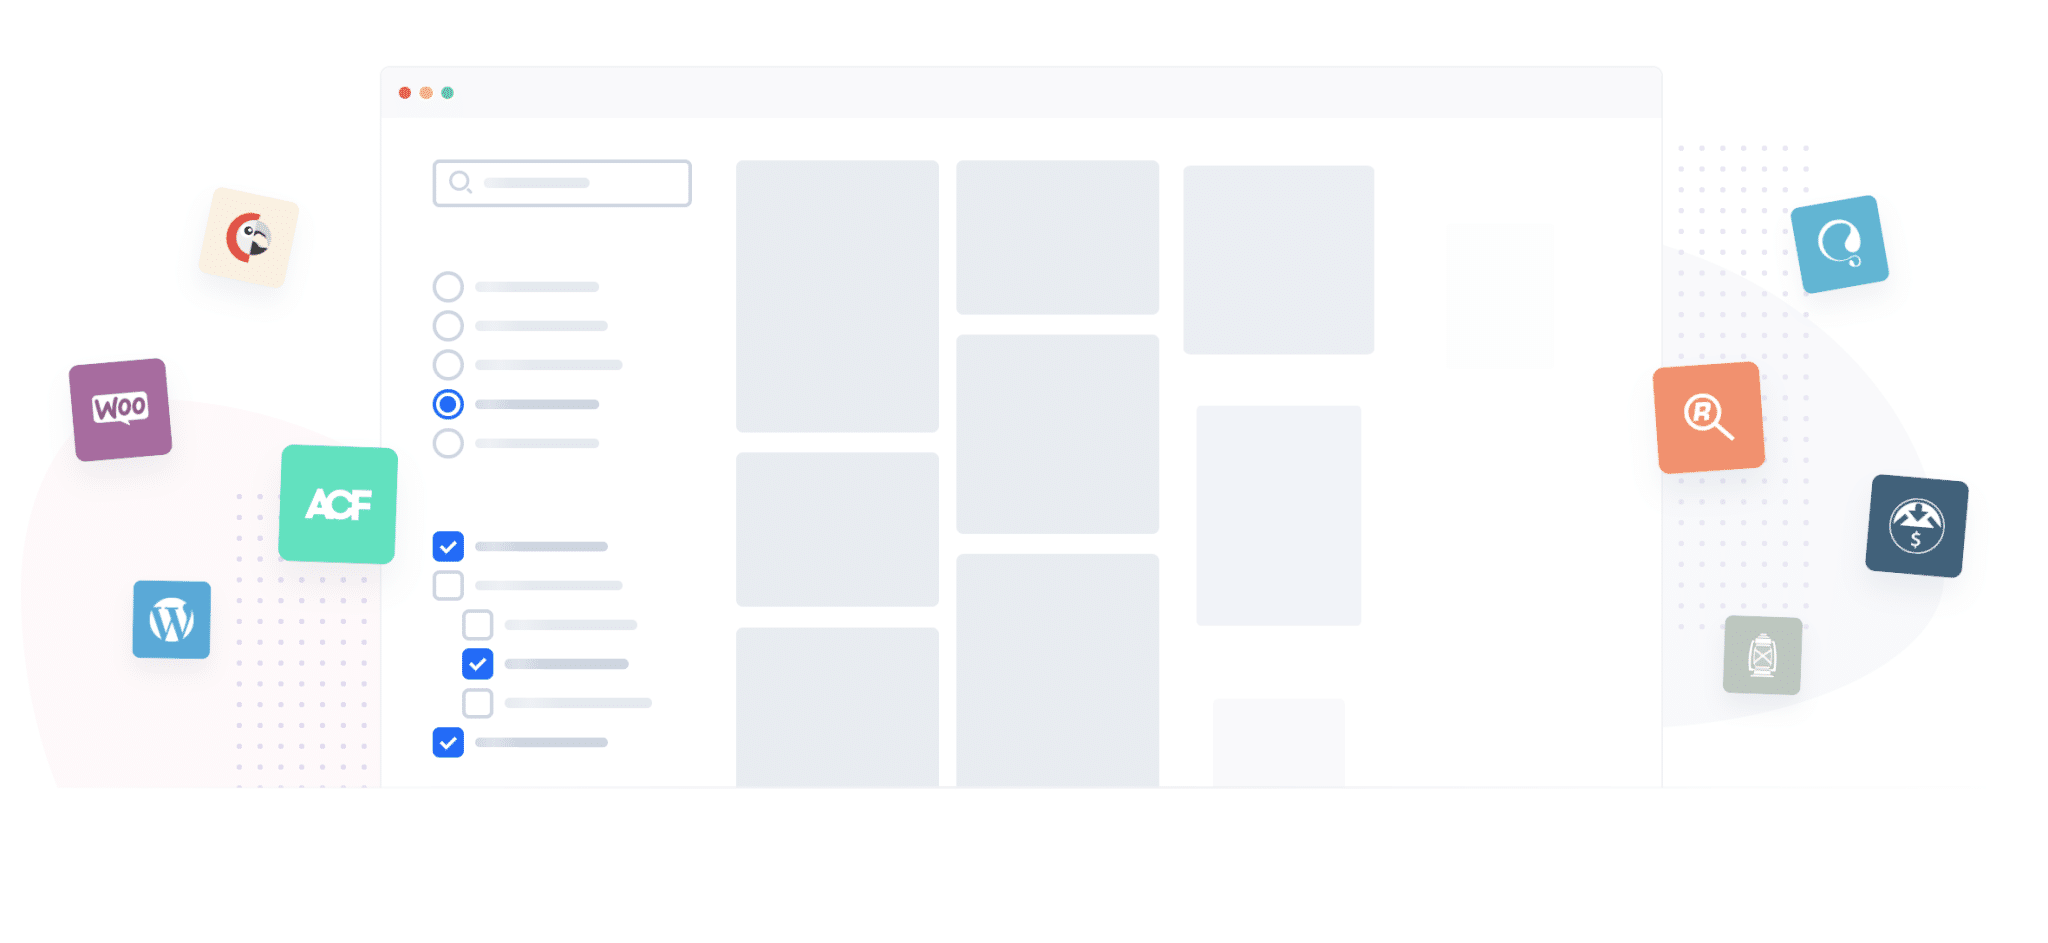 WP Grid Builder allows to create filterable grids on WordPress.